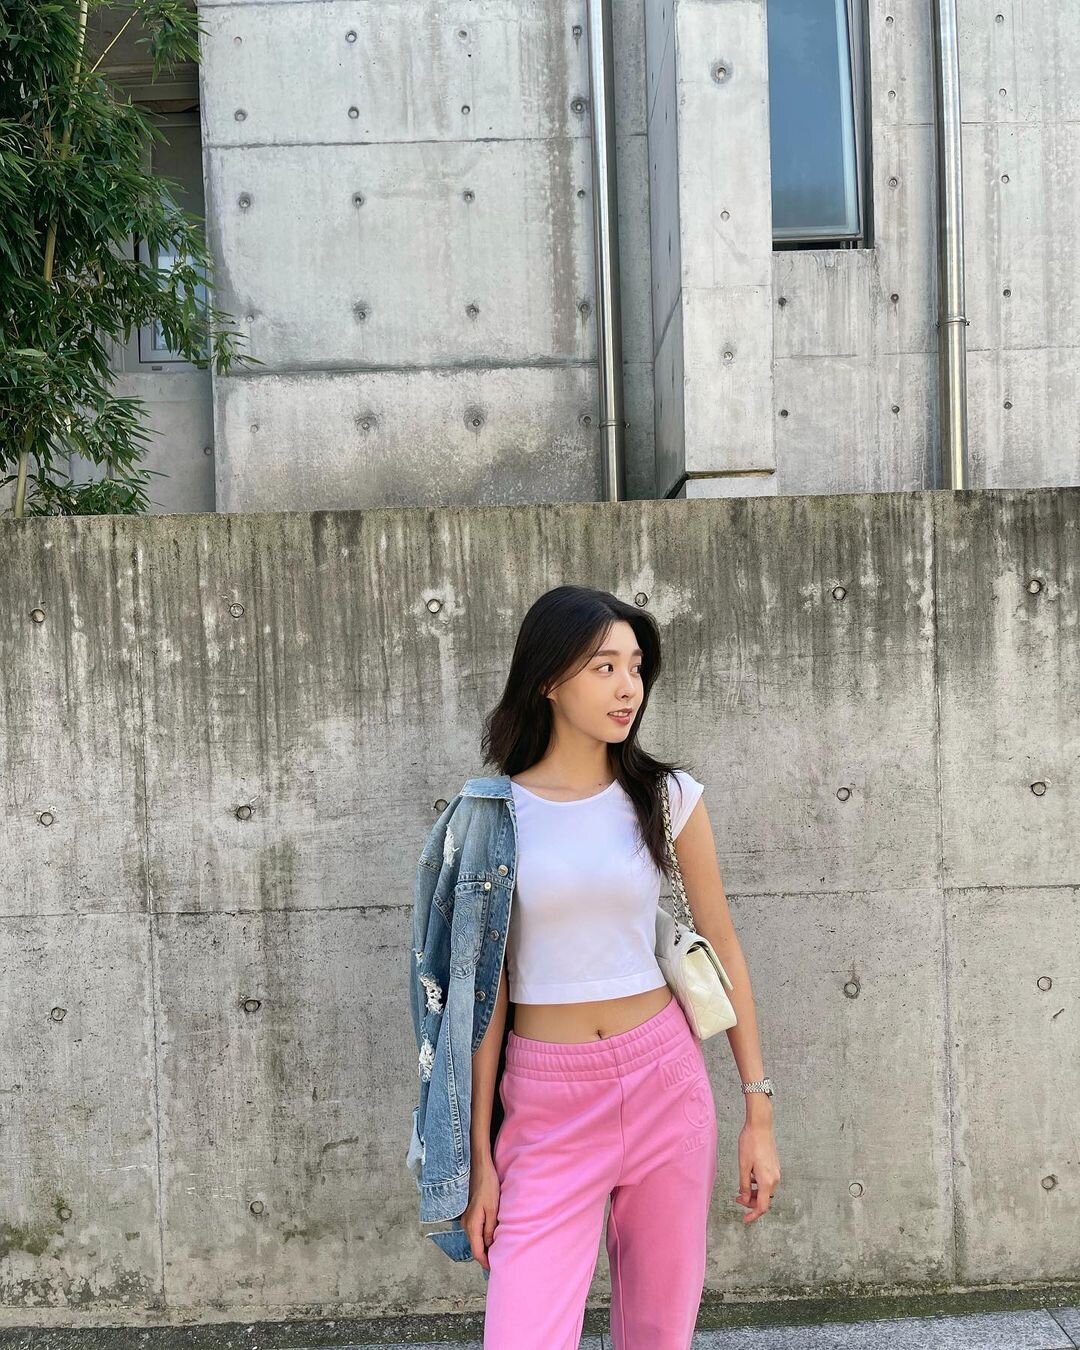 October 1, 2021 Sehyung Instagram Update (BERRY GOOD) | Kpopping